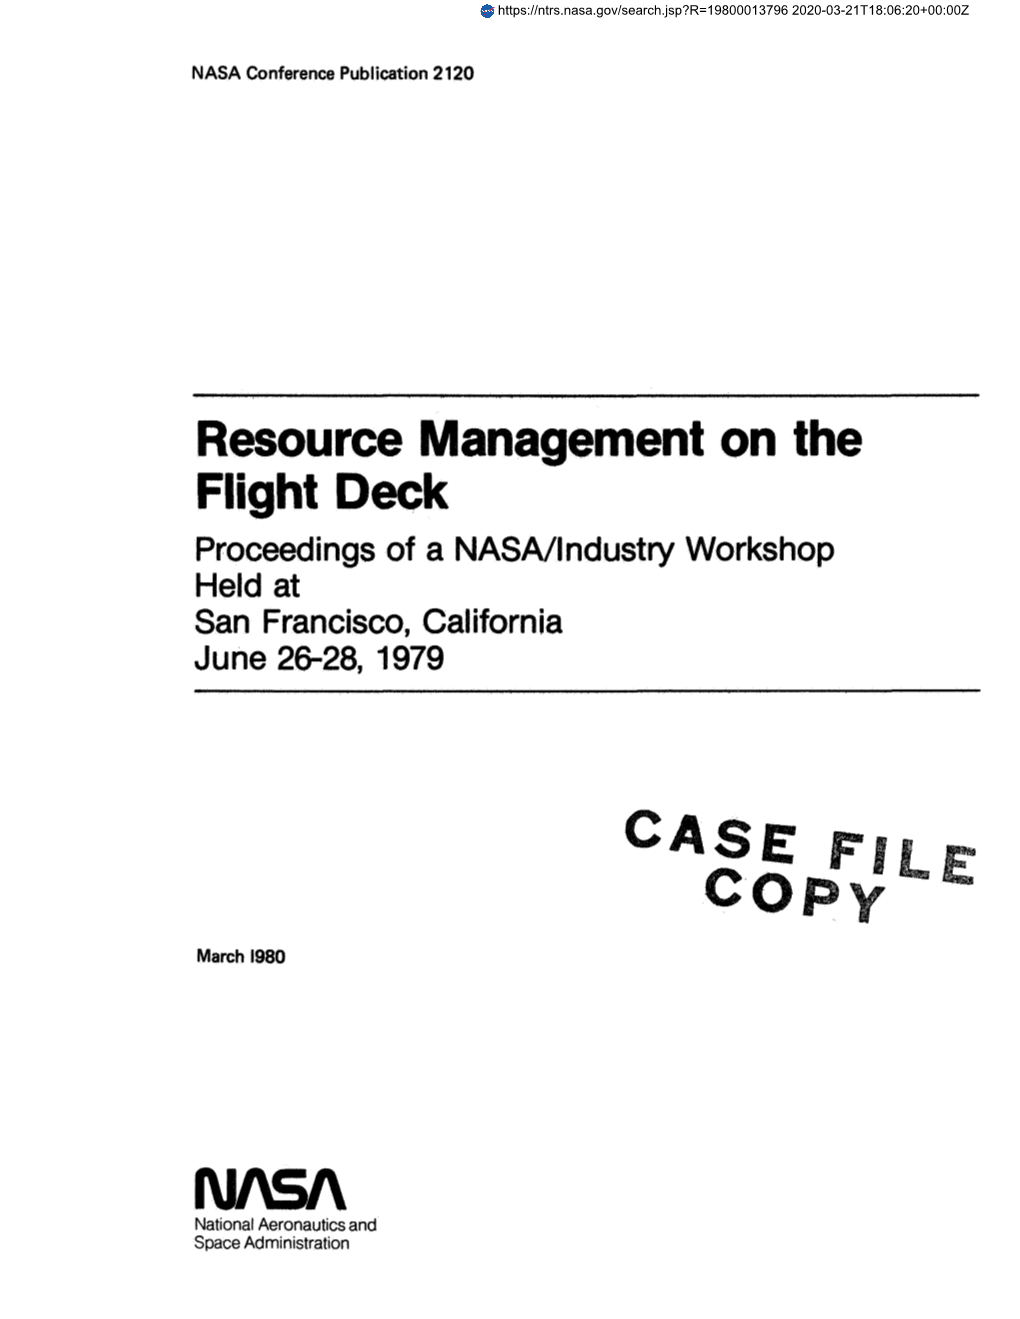 Resource Management on the Flight Deck Proceedings of a NASA/Industry Workshop Held at San Francisco, California June 26-28, 1979